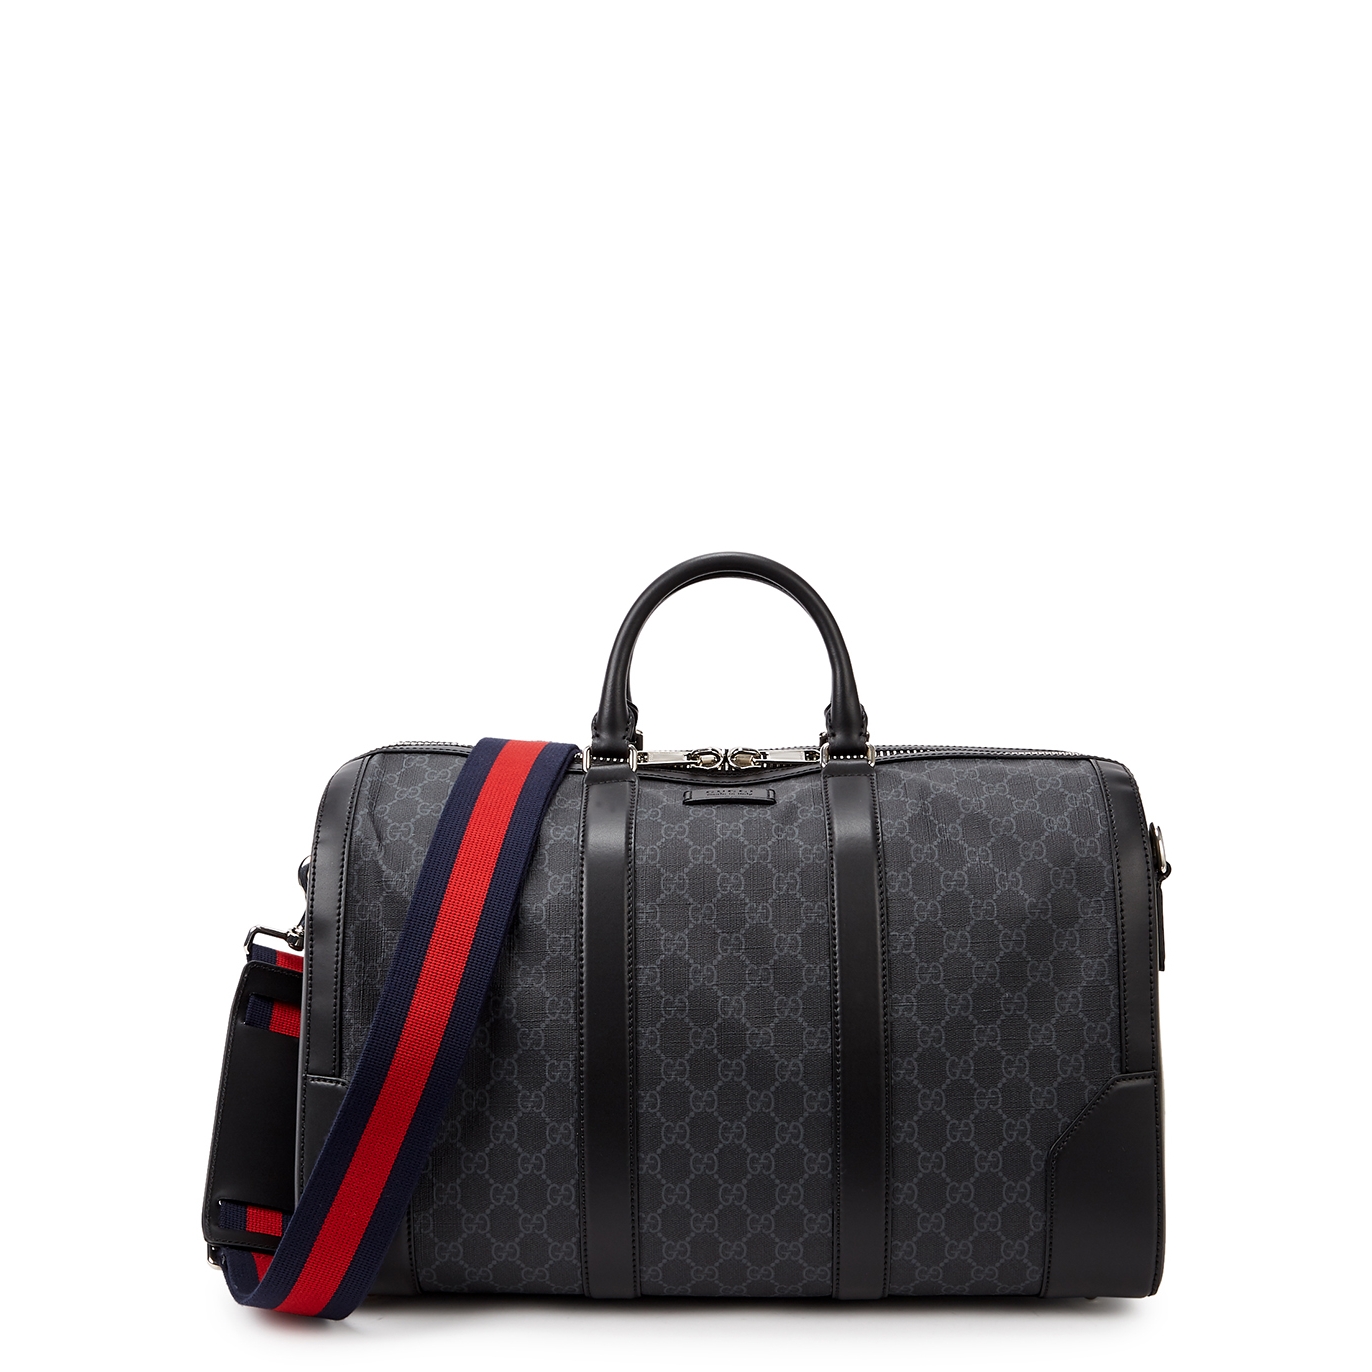 Gucci Gg Supreme Monogrammed Holdall - Black And Red